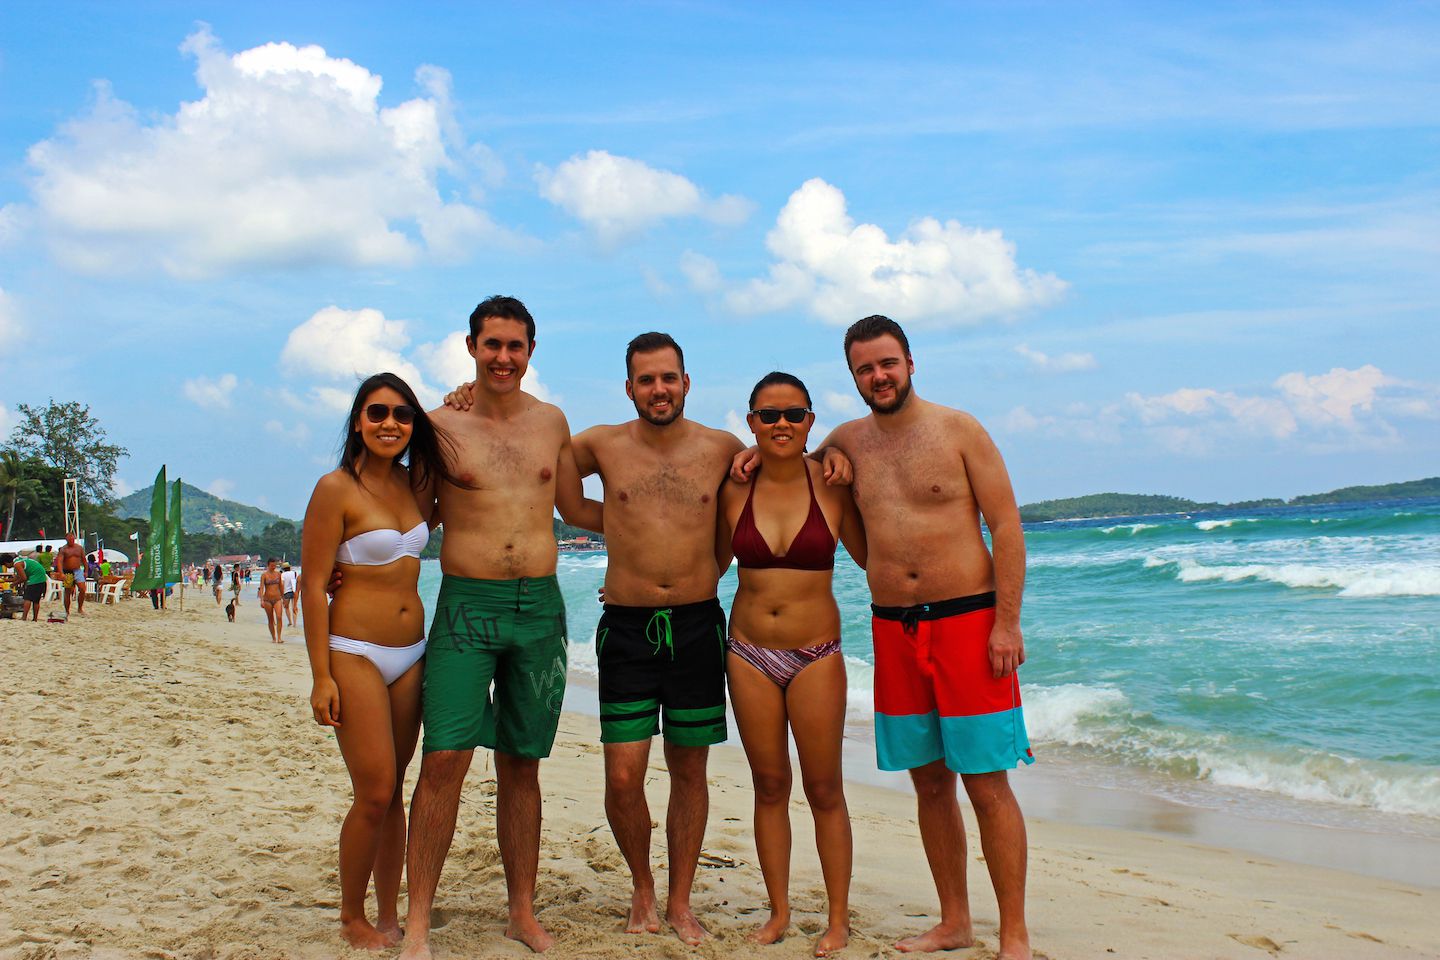 The company couldn't have been better, Chaweng Beach, Koh Samui, Thailand